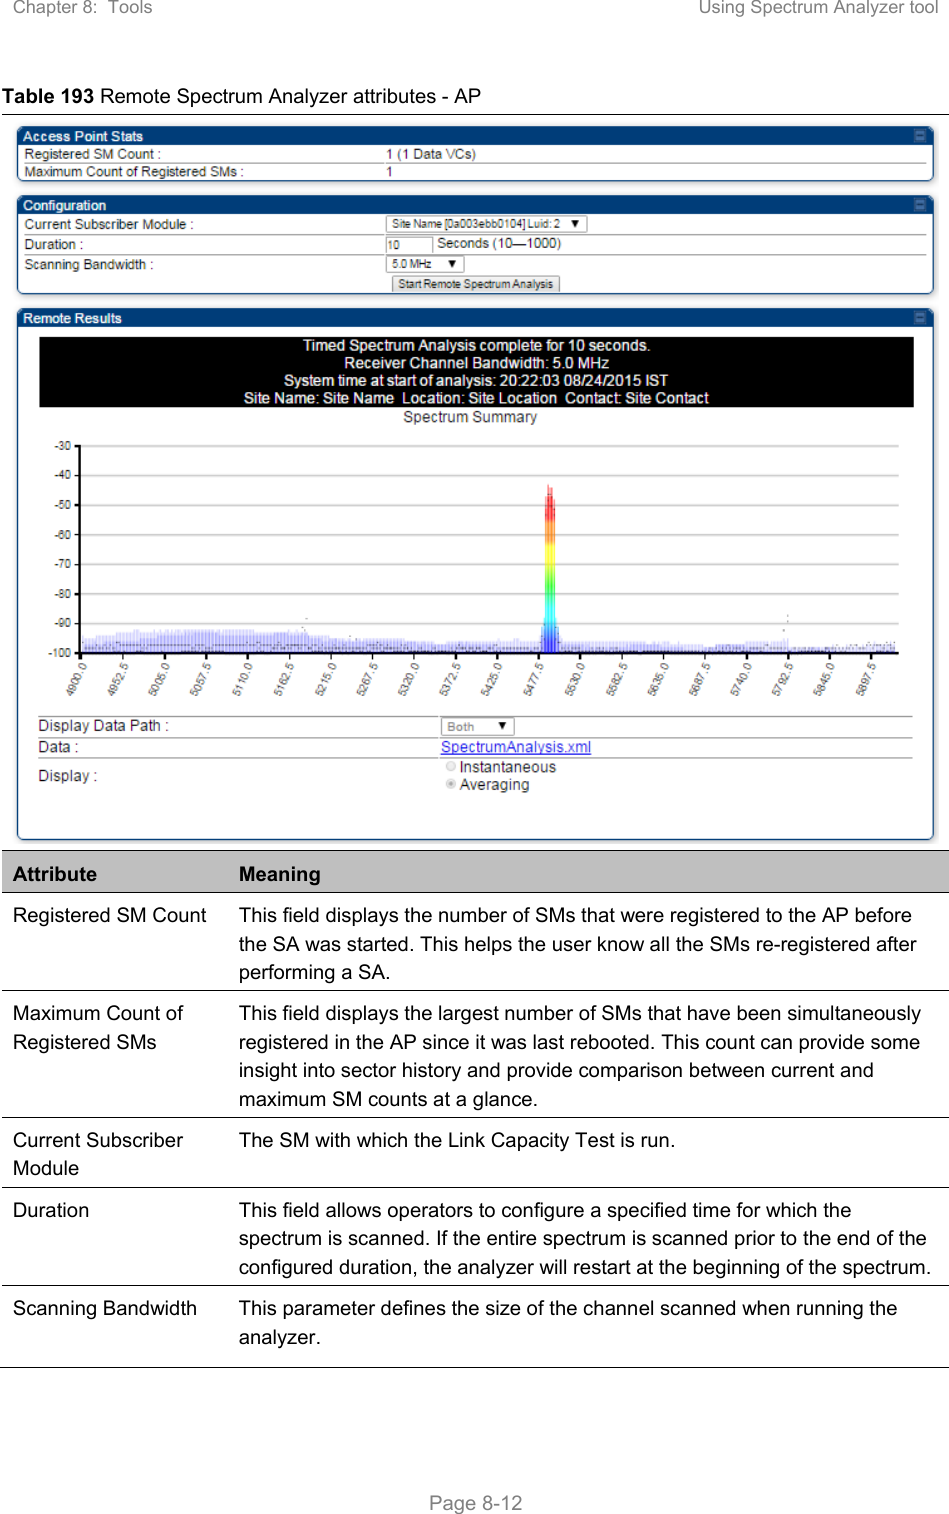 Chapter 8:  Tools  Using Spectrum Analyzer tool   Page 8-12 Table 193 Remote Spectrum Analyzer attributes - AP Attribute  Meaning Registered SM Count  This field displays the number of SMs that were registered to the AP before the SA was started. This helps the user know all the SMs re-registered after performing a SA. Maximum Count of Registered SMs This field displays the largest number of SMs that have been simultaneously registered in the AP since it was last rebooted. This count can provide some insight into sector history and provide comparison between current and maximum SM counts at a glance. Current Subscriber Module The SM with which the Link Capacity Test is run. Duration  This field allows operators to configure a specified time for which the spectrum is scanned. If the entire spectrum is scanned prior to the end of the configured duration, the analyzer will restart at the beginning of the spectrum. Scanning Bandwidth  This parameter defines the size of the channel scanned when running the analyzer. 